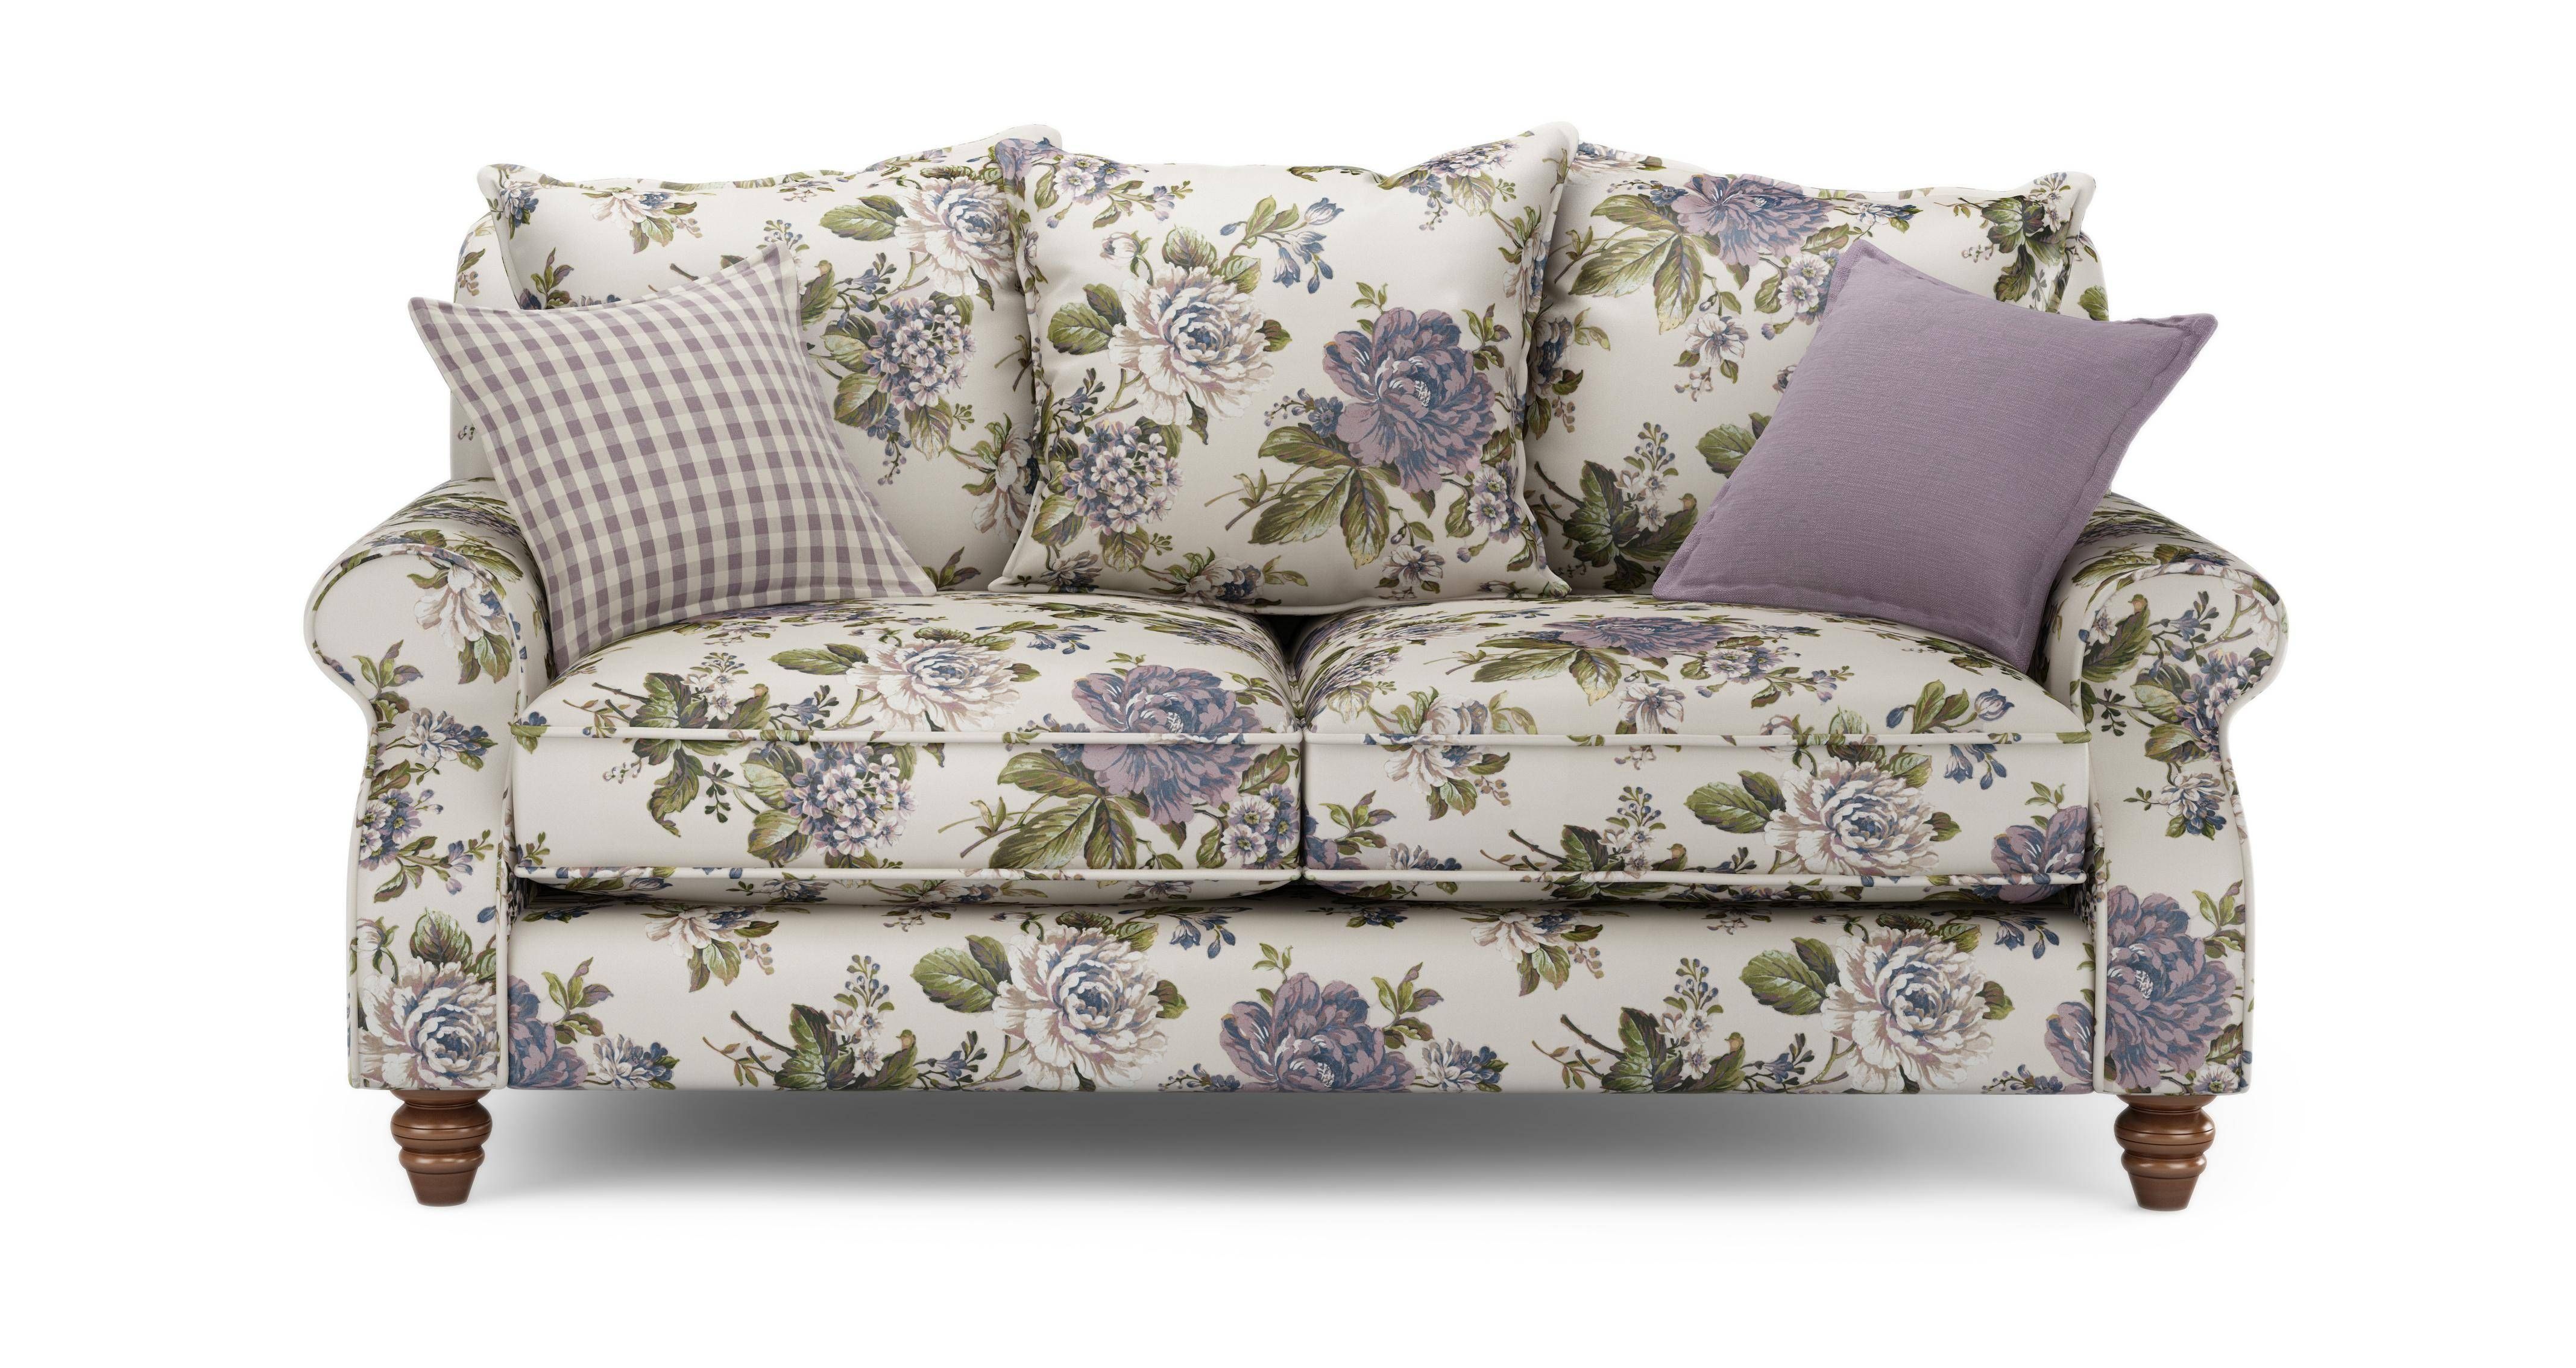 Modern Concept Floral Sofas With Ellie Floral Seater Sofa Ellie Throughout Floral Sofas (View 1 of 15)